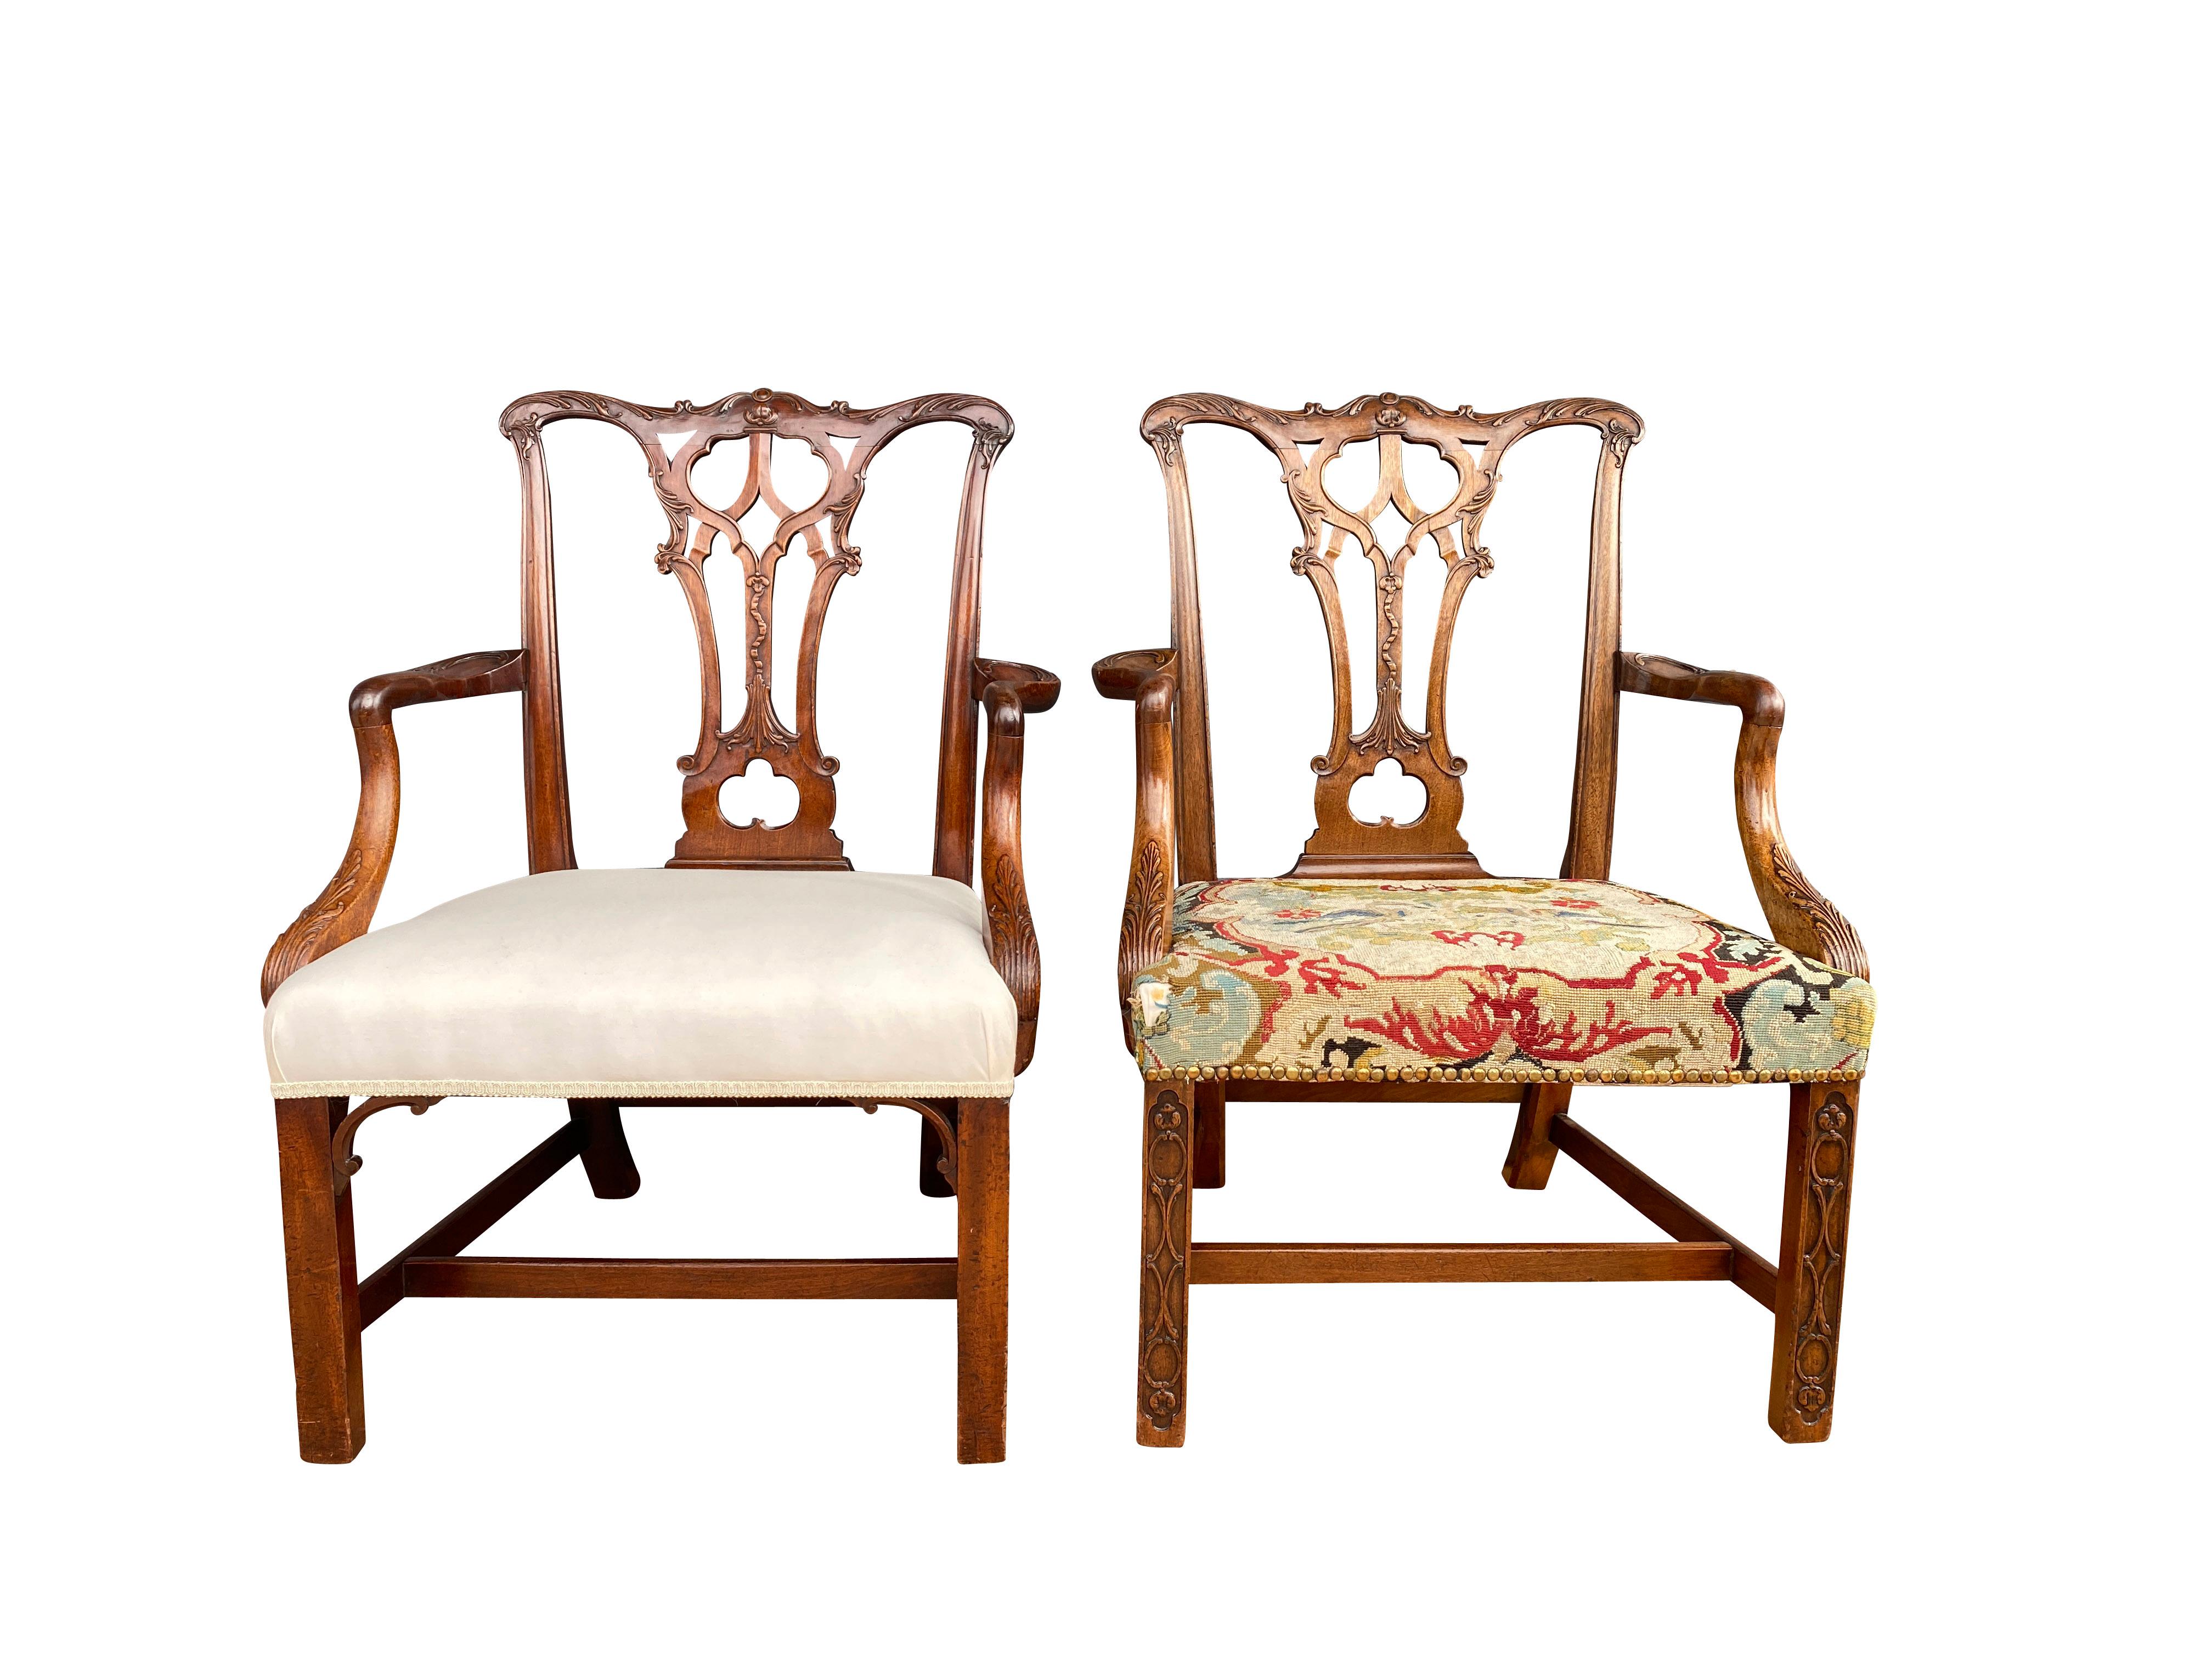 These chairs were sourced from two different locations one from New York the other Boston. They are English and are from the same set reunited after many years apart. The difference between them is that one has later blind fret carved legs done as